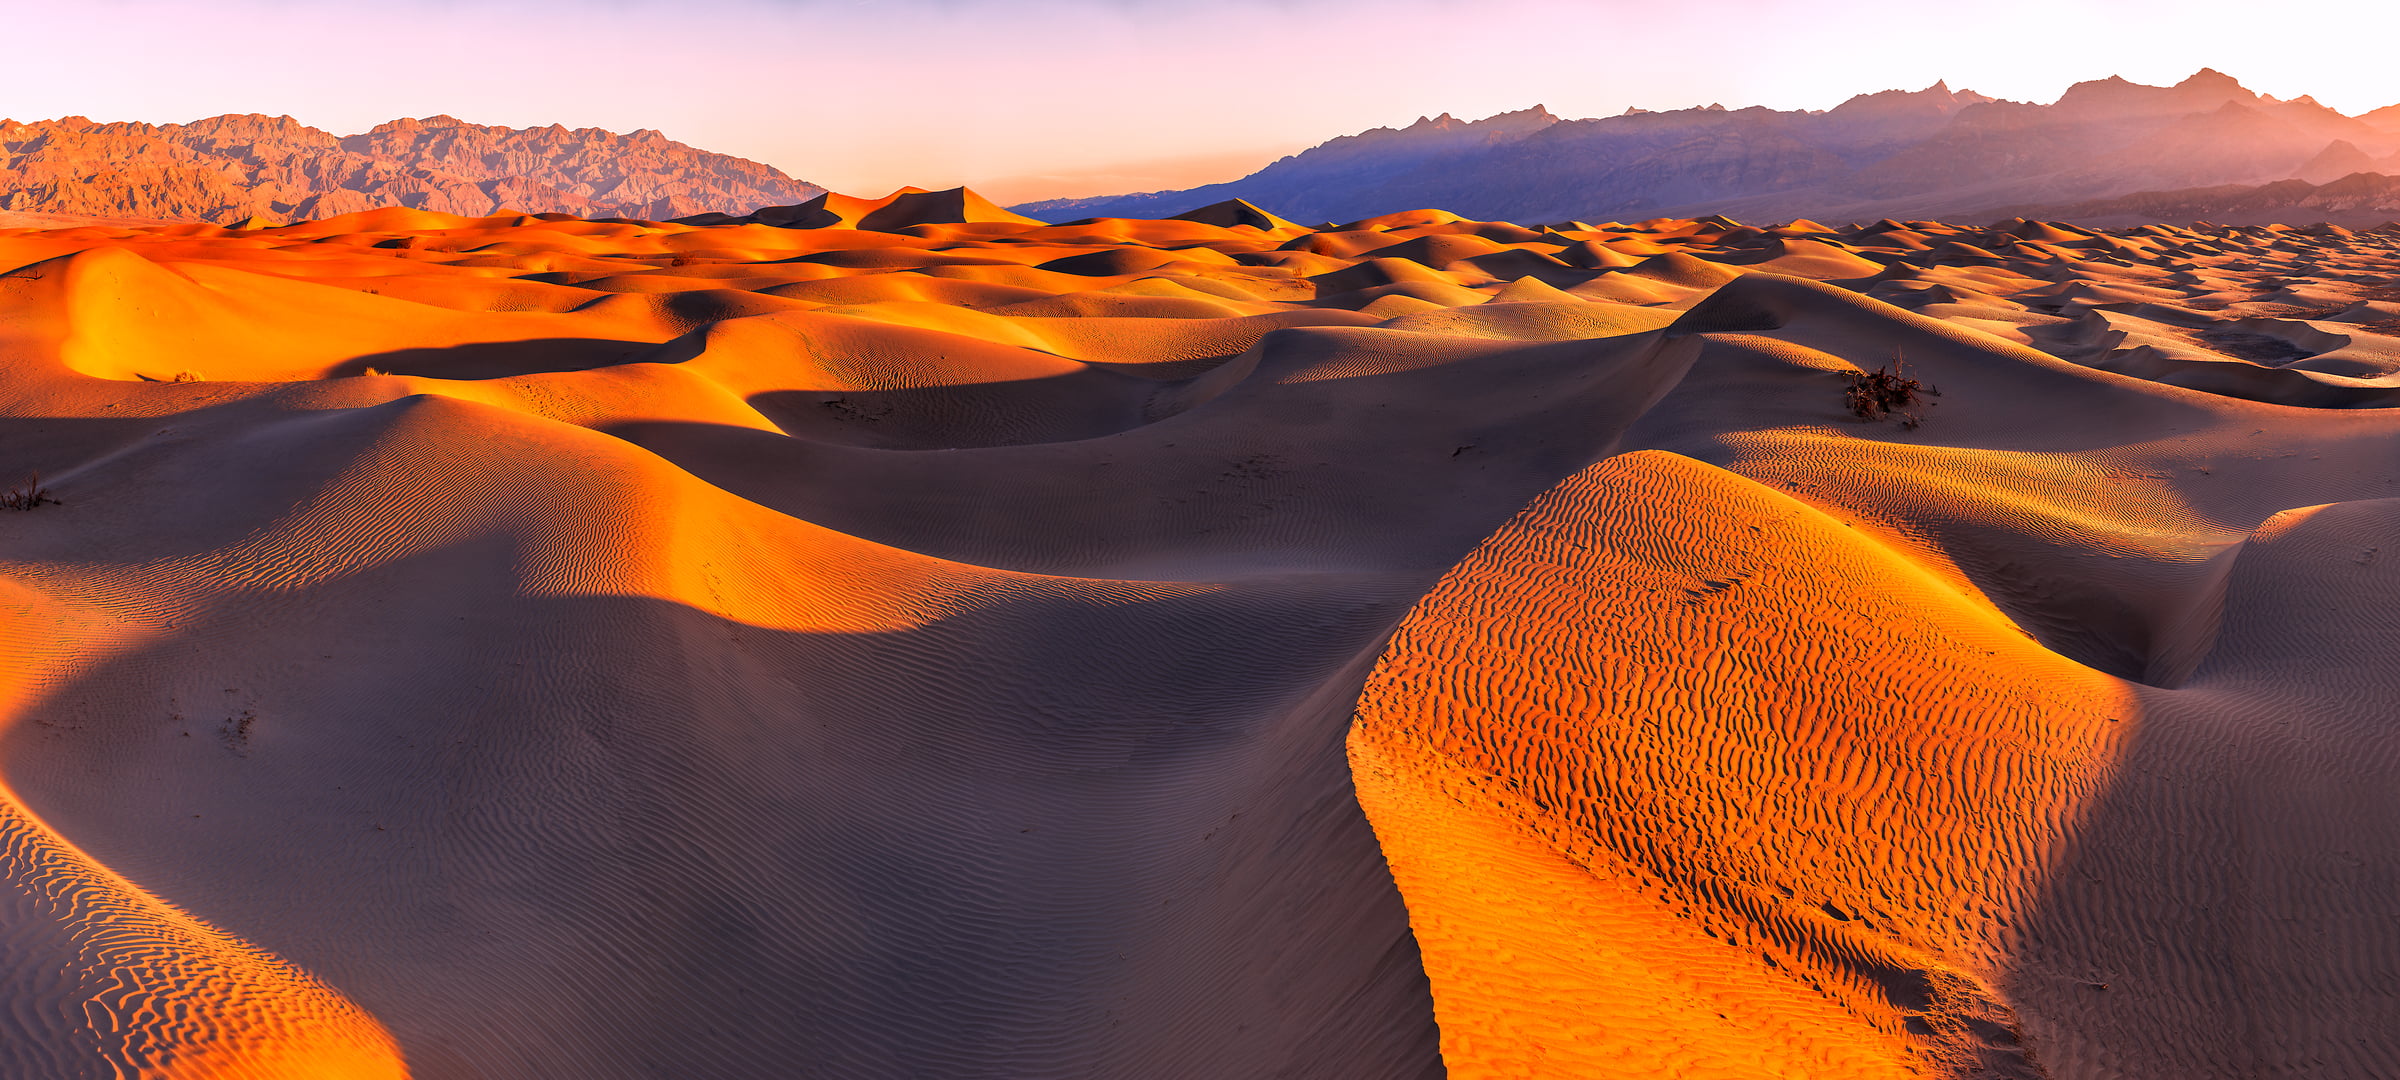 1,831 megapixels! A very high resolution, large-format VAST photo print of sand dunes in Death Valley National Park; fine art landscape photo created by Chris Collacott in Death Valley National Park, California